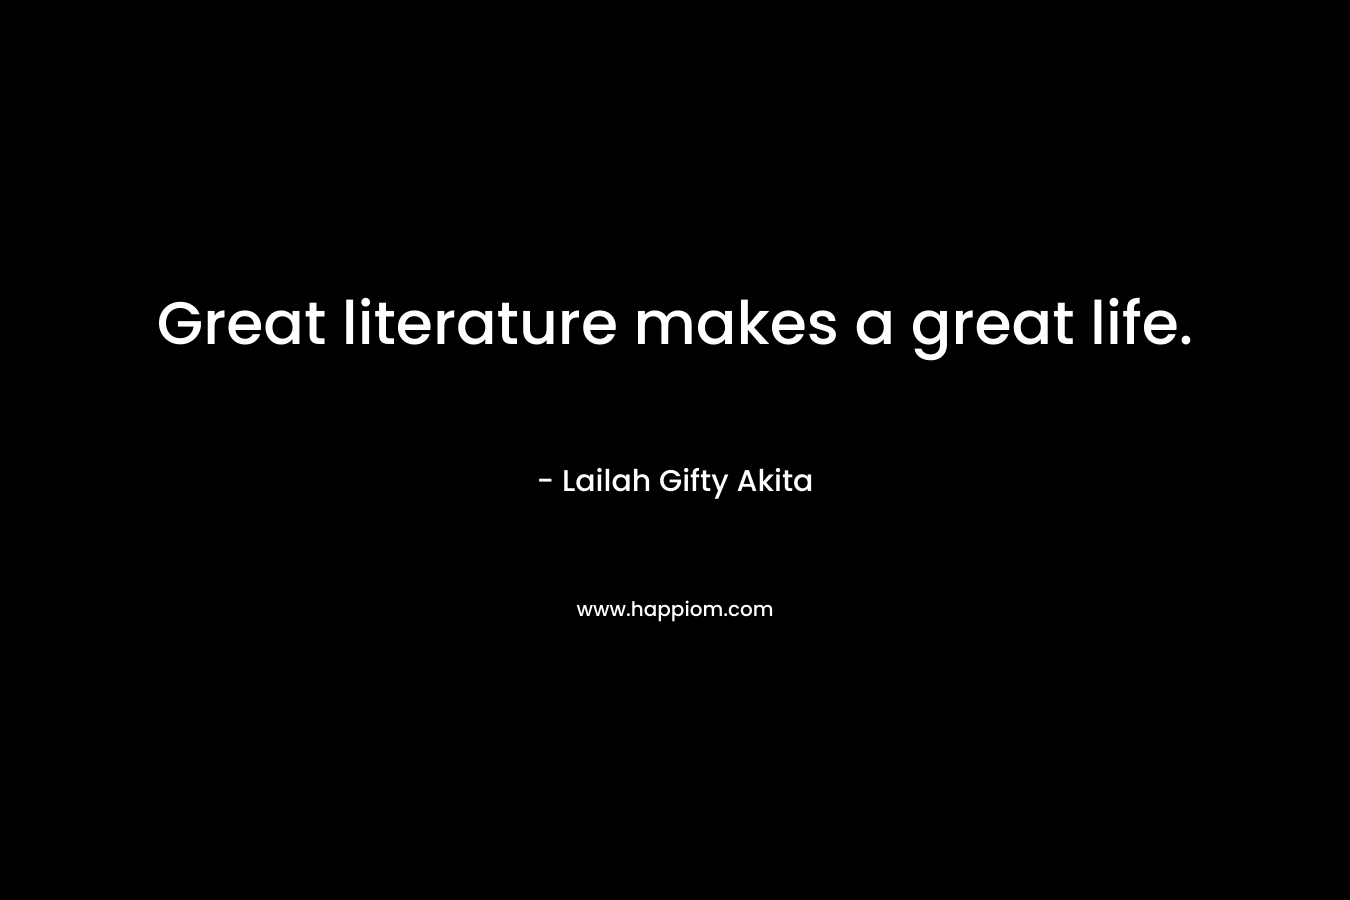 Great literature makes a great life.